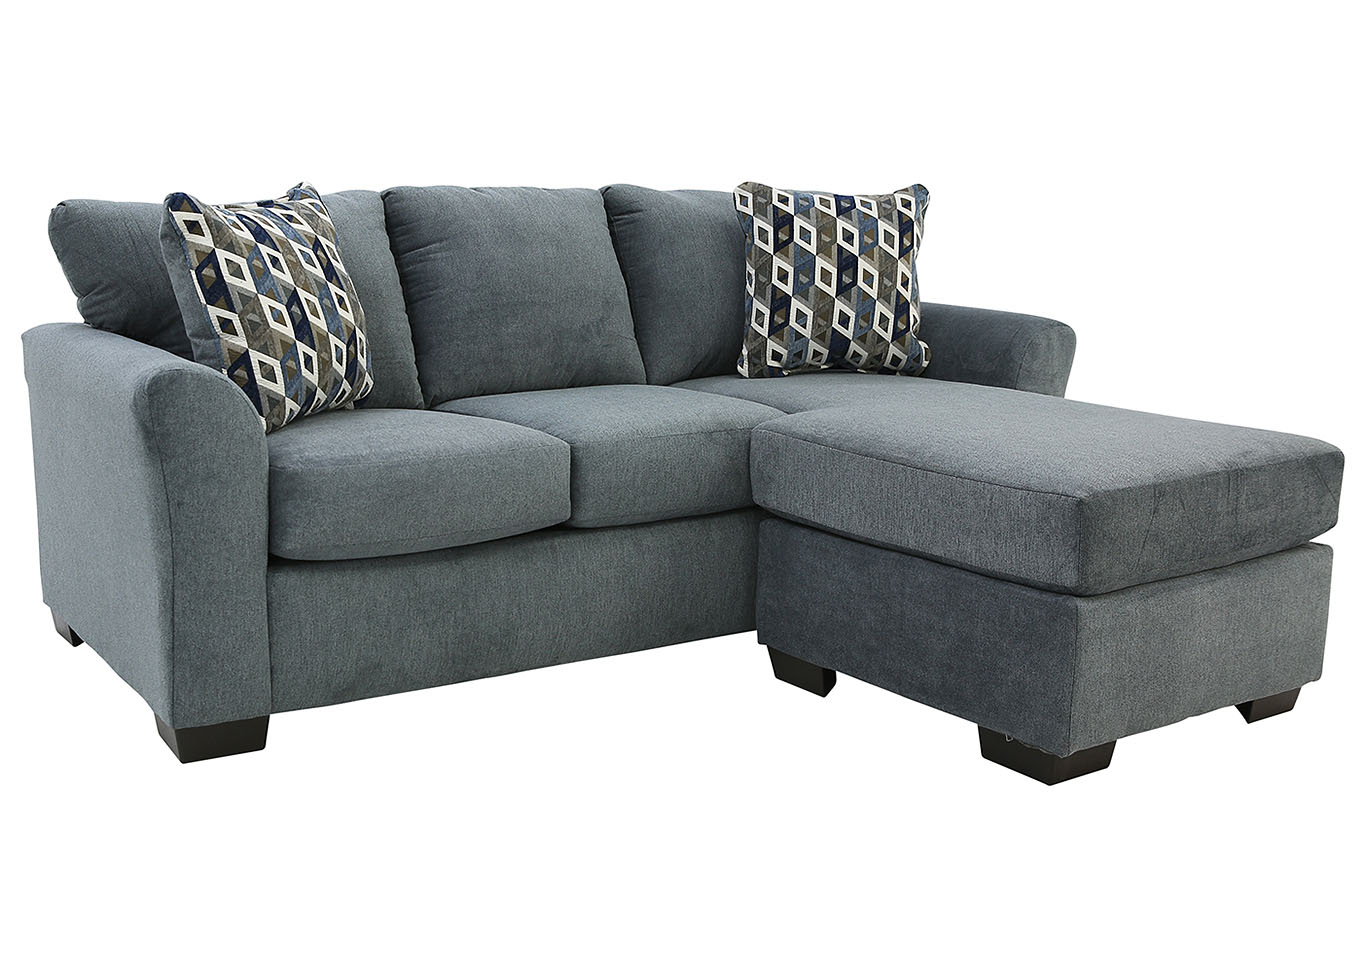 Affordable Furniture Anna Blue/Grey Sofa and Chaise